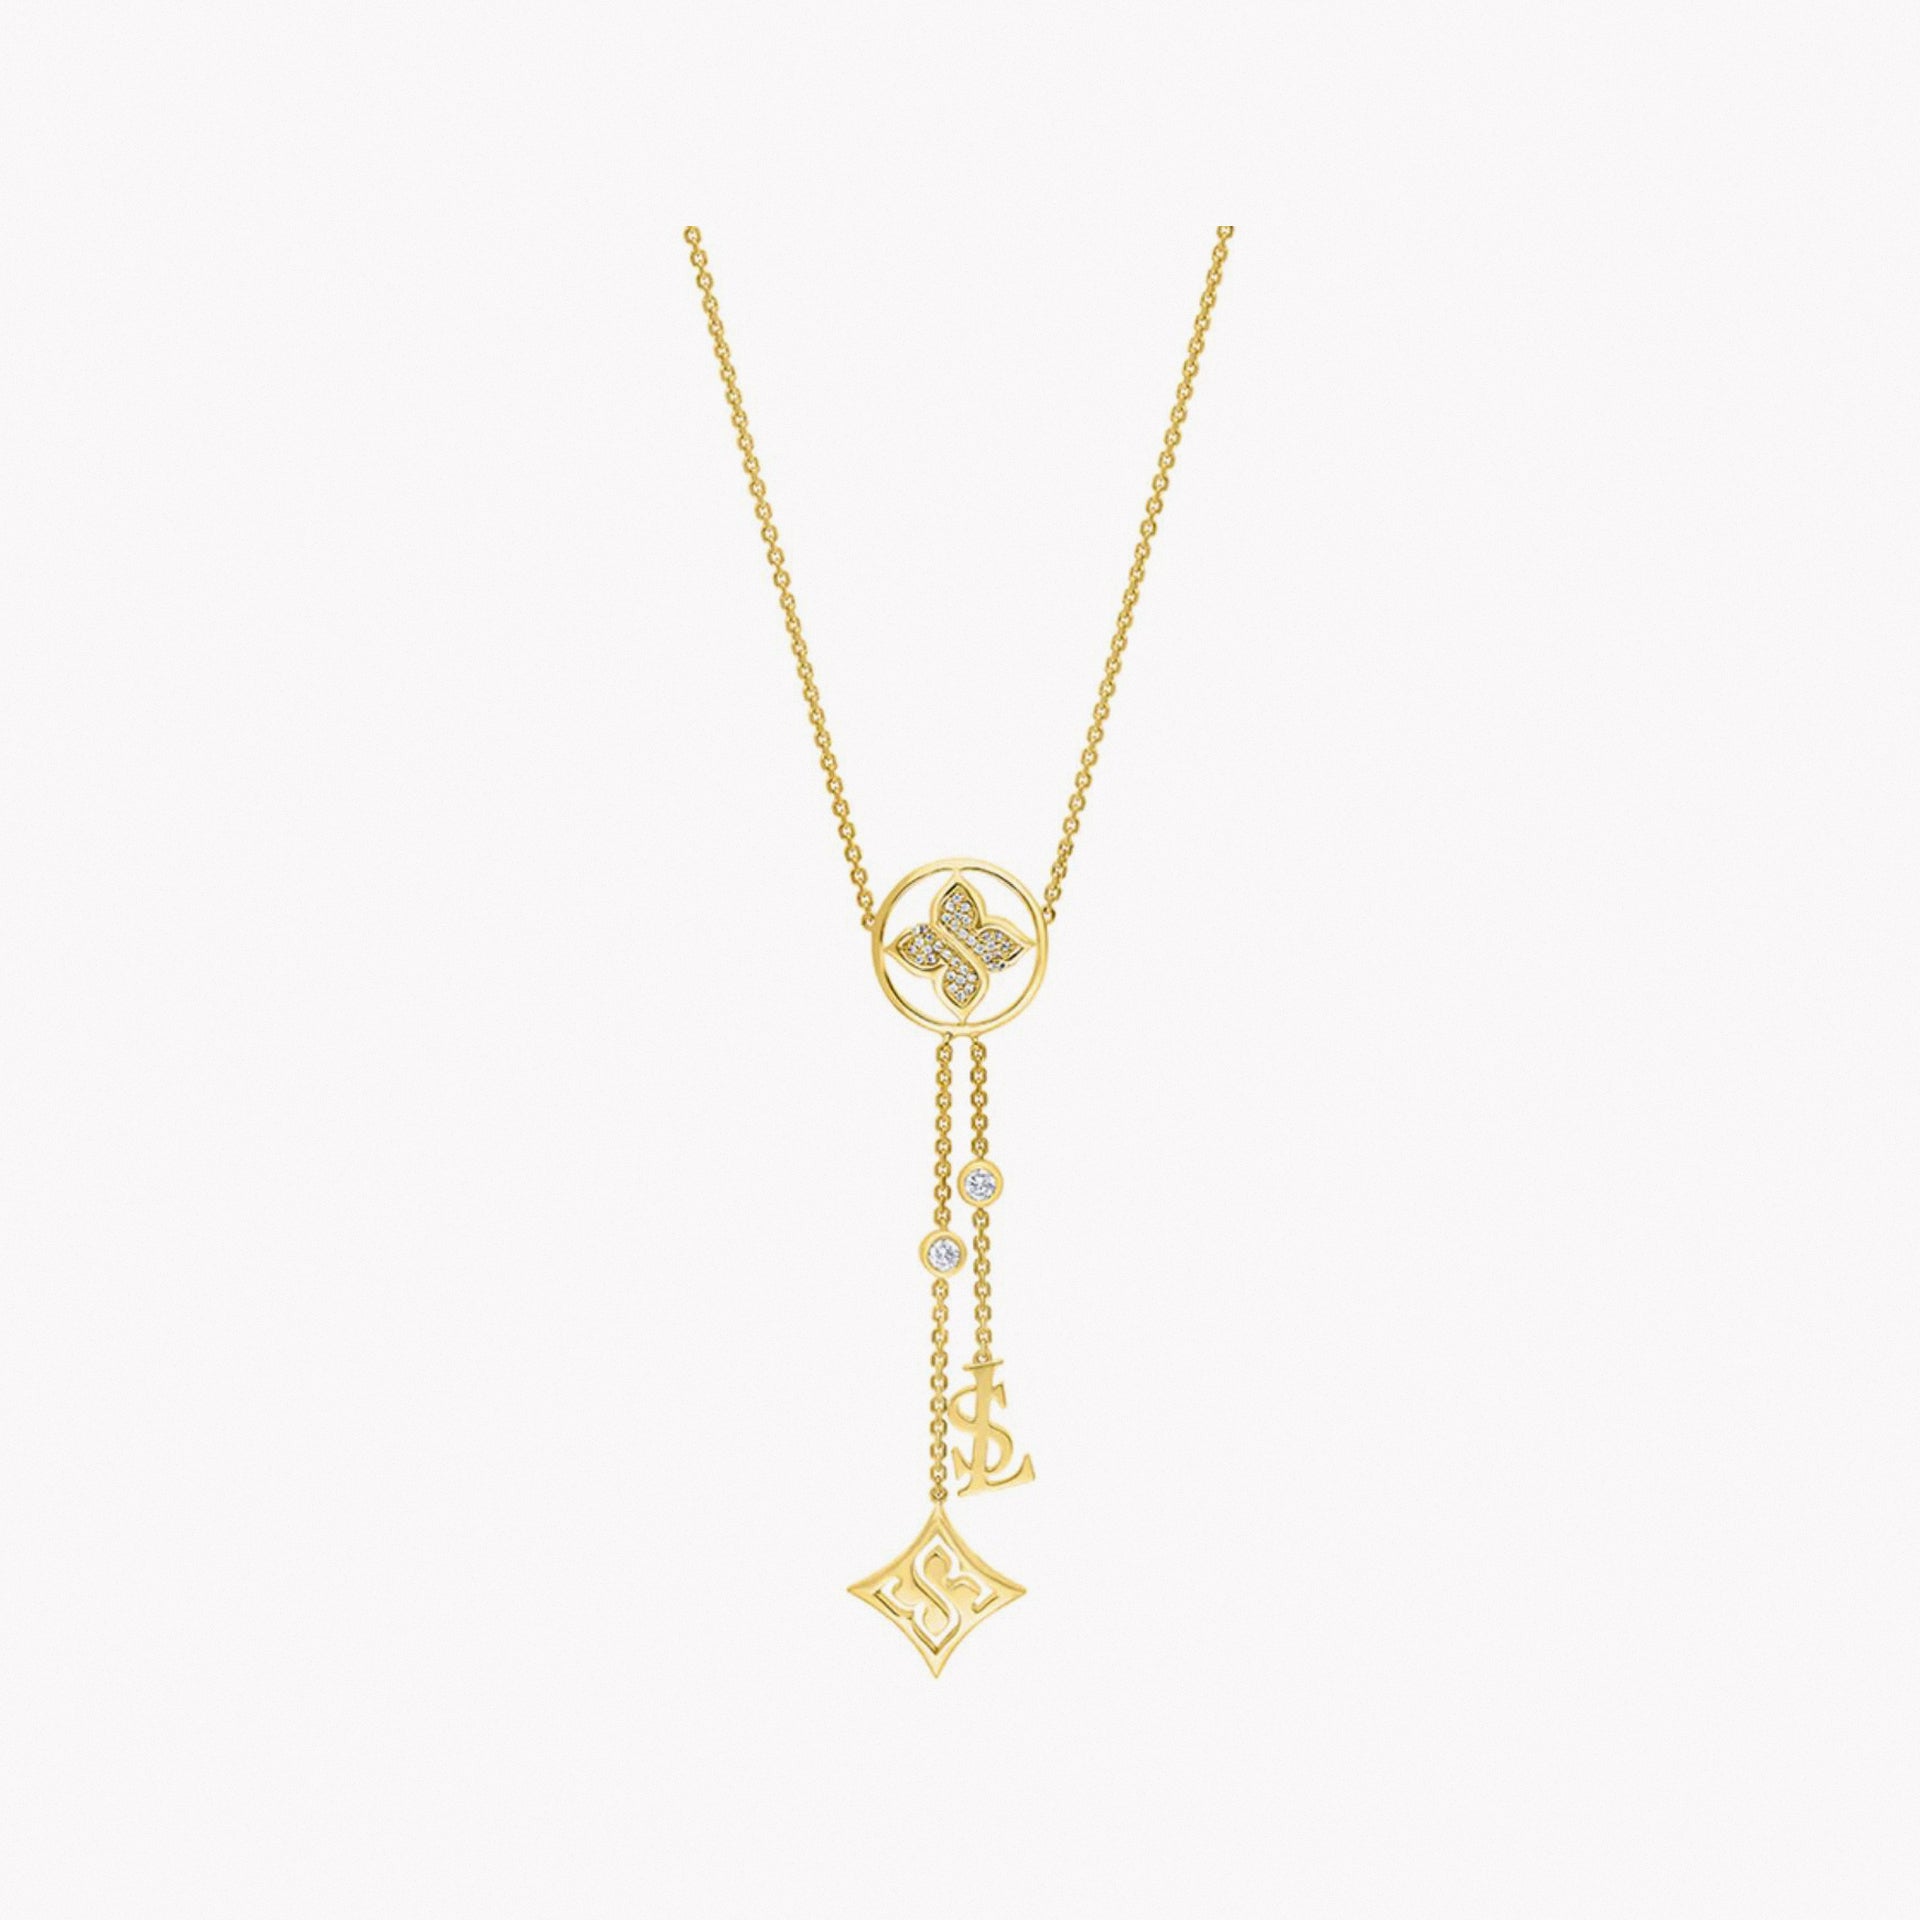 Gold Signature Y Necklace From Le Soleil